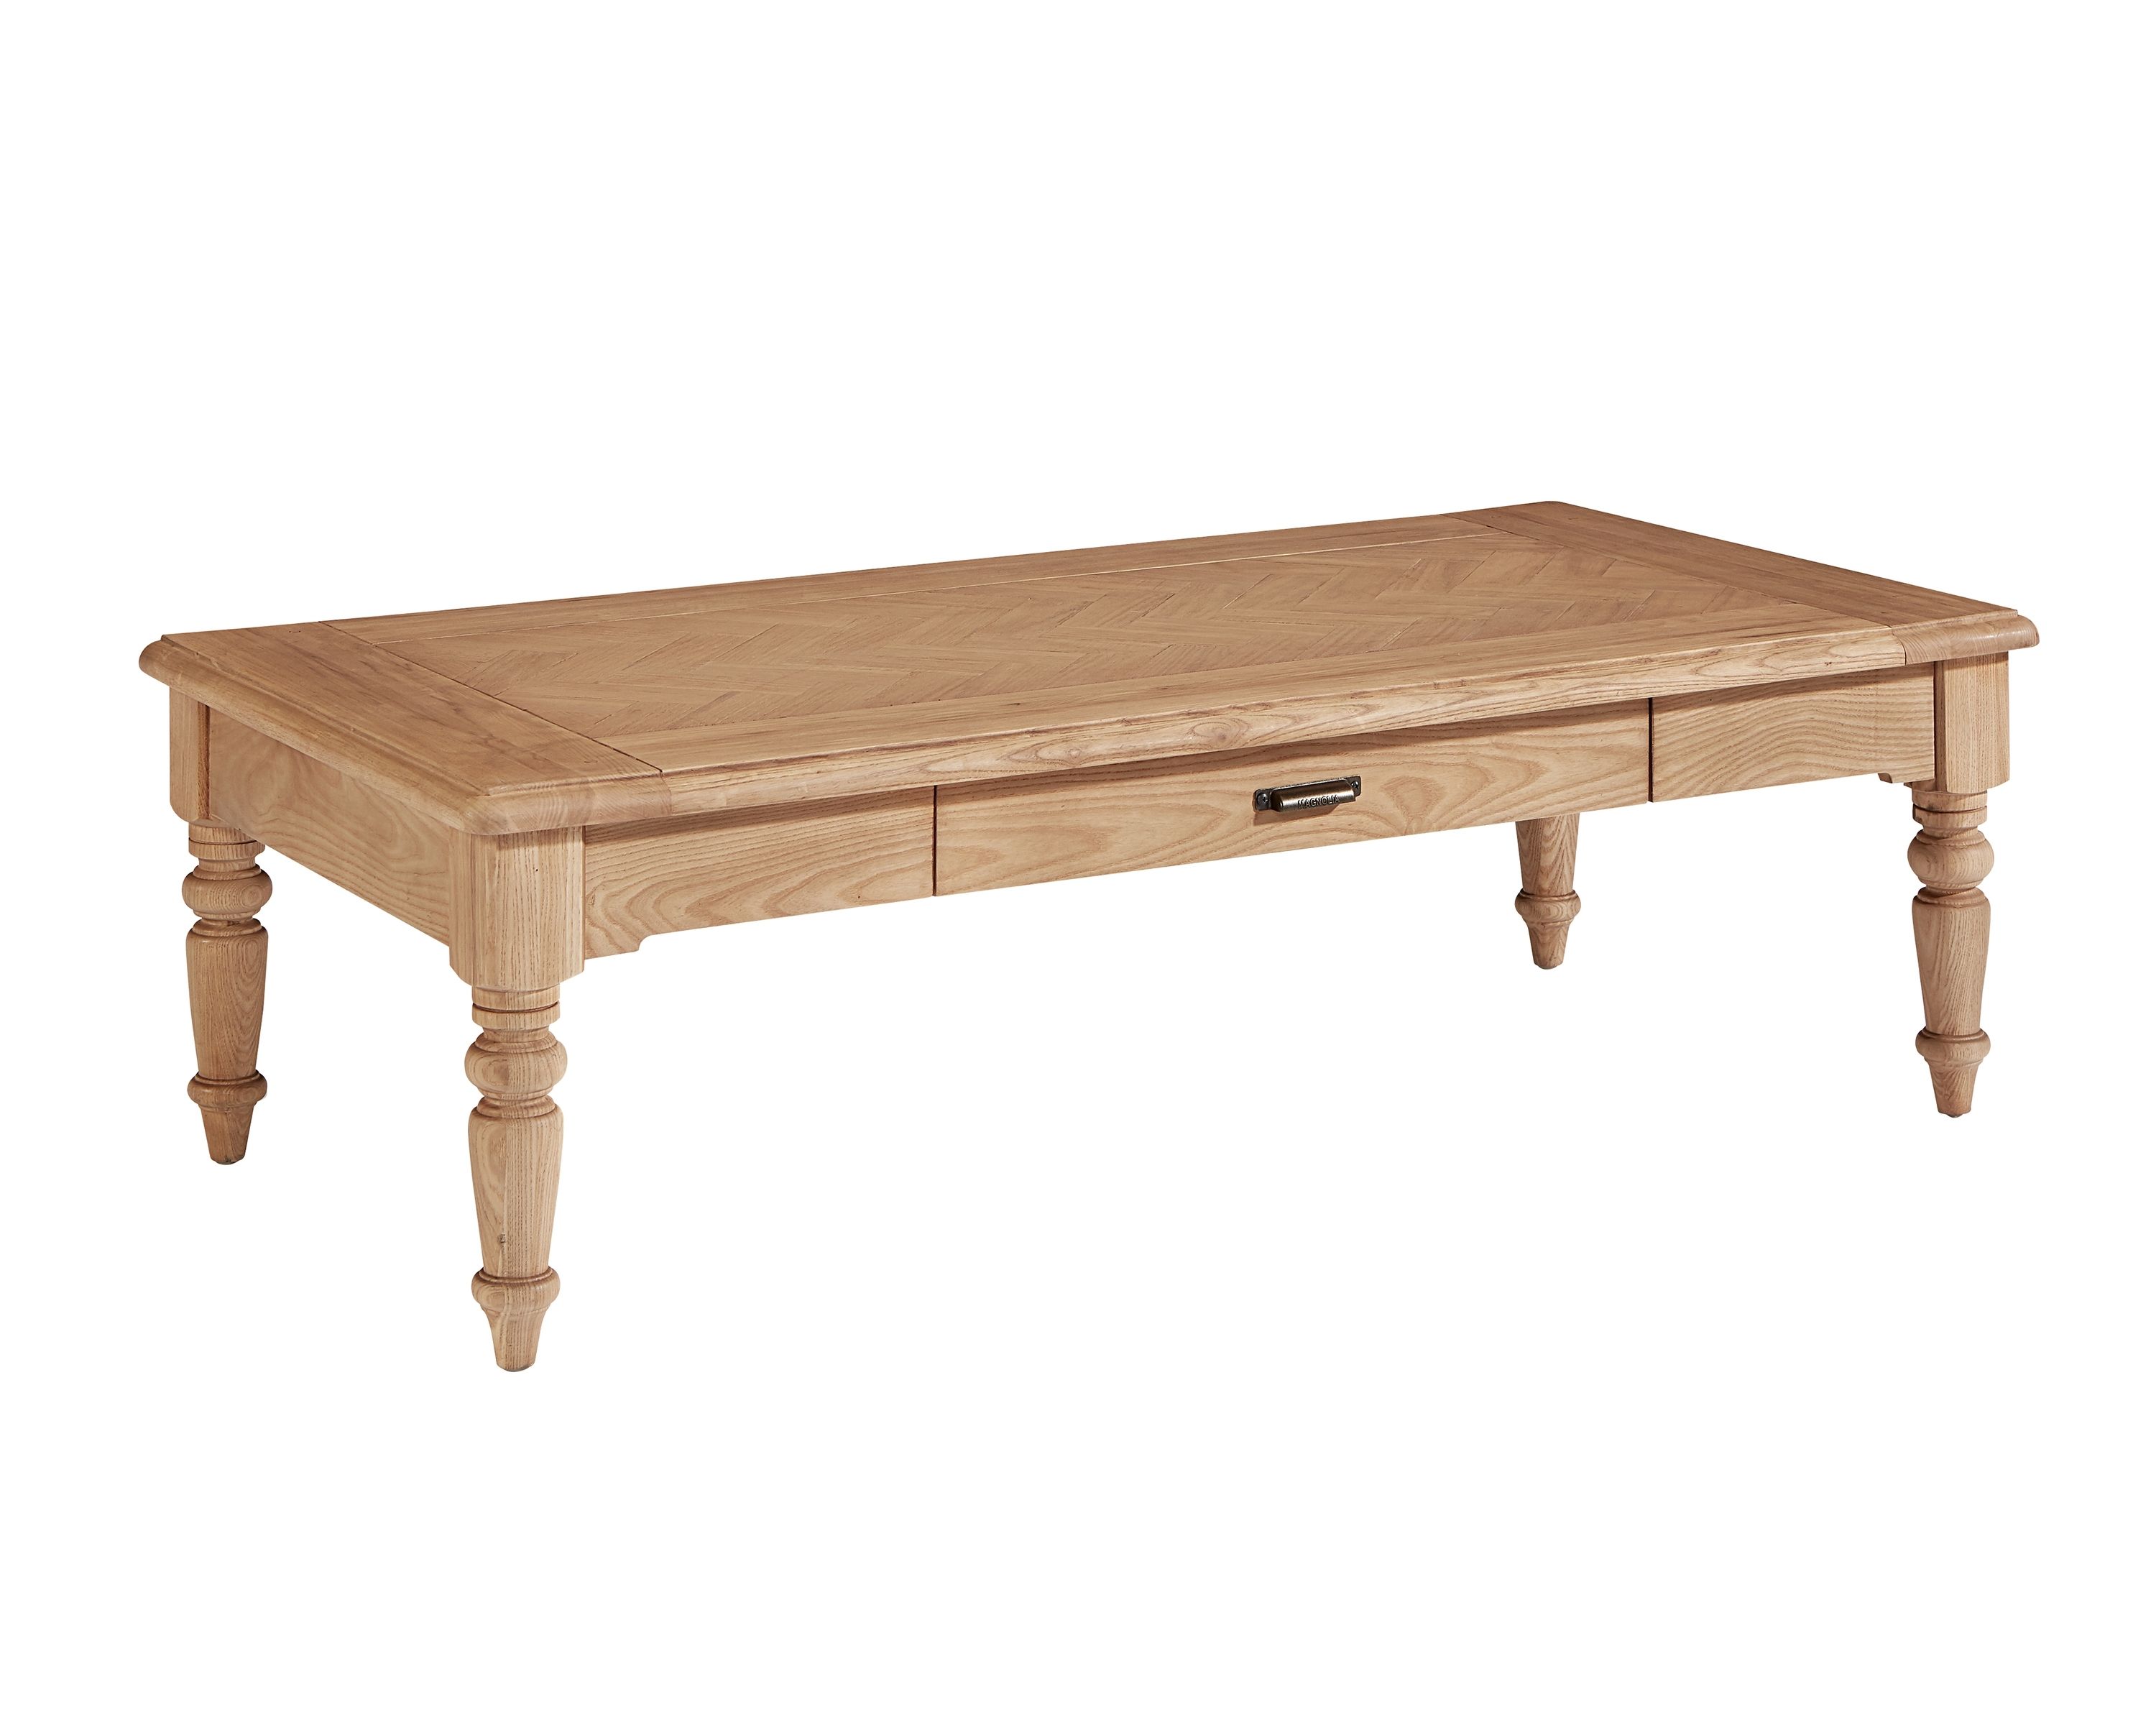 Prairie Coffee Table – Magnolia Home Throughout Best And Newest Magnolia Home Prairie Dining Tables (View 3 of 20)